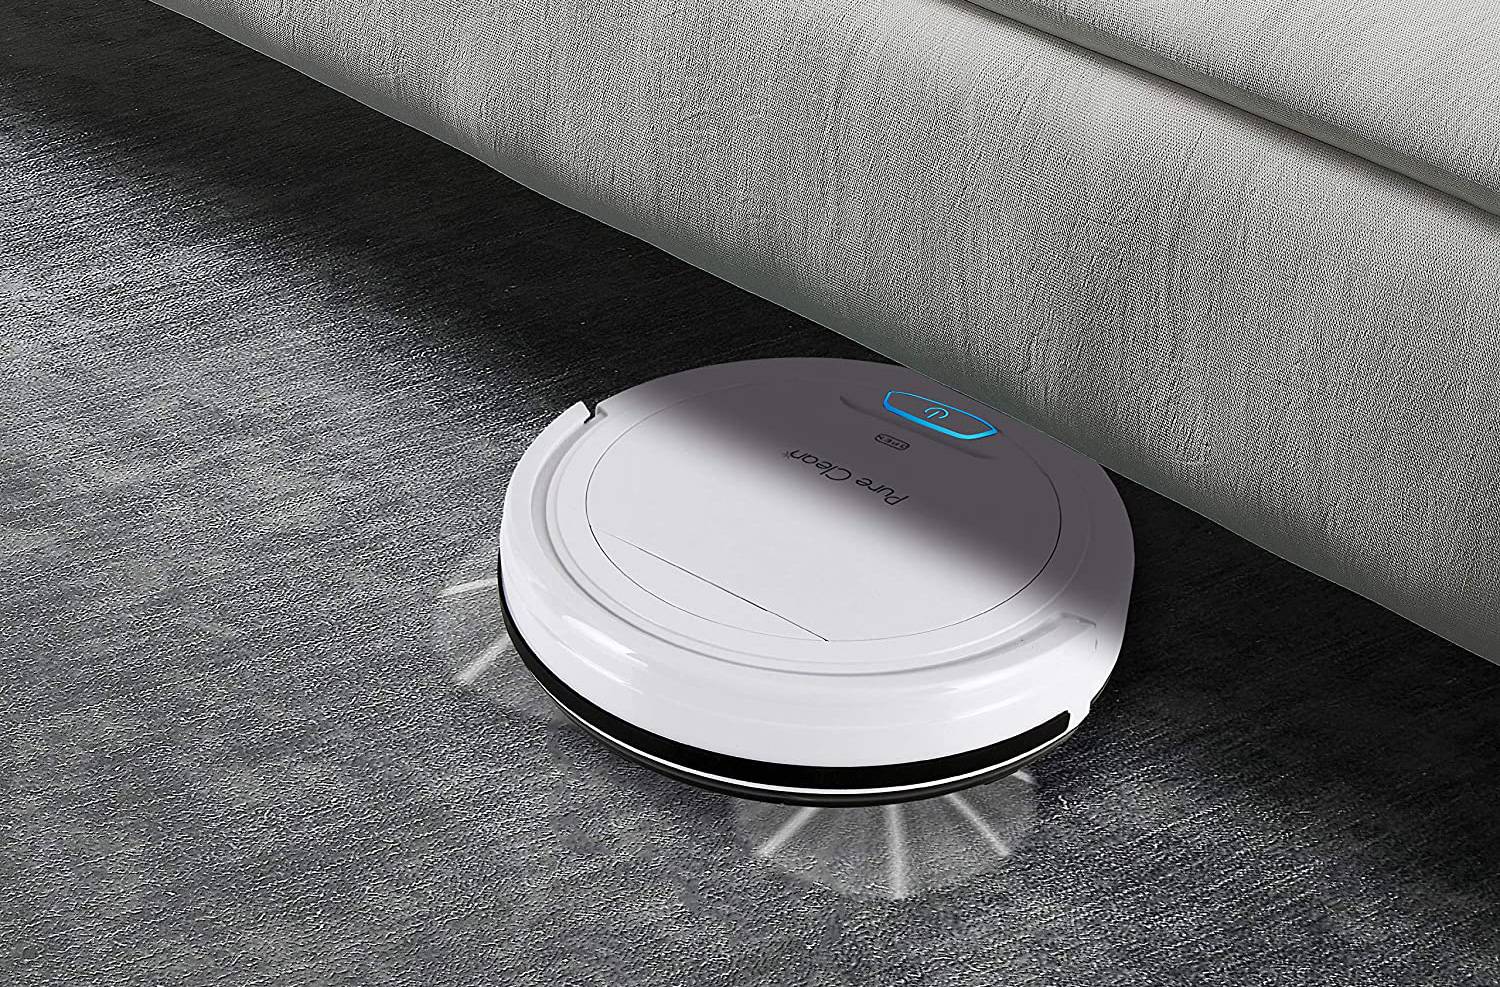 Don’t are looking out for to use hundreds? This entirely-promoting robotic vacuum is entirely $90 at Amazon